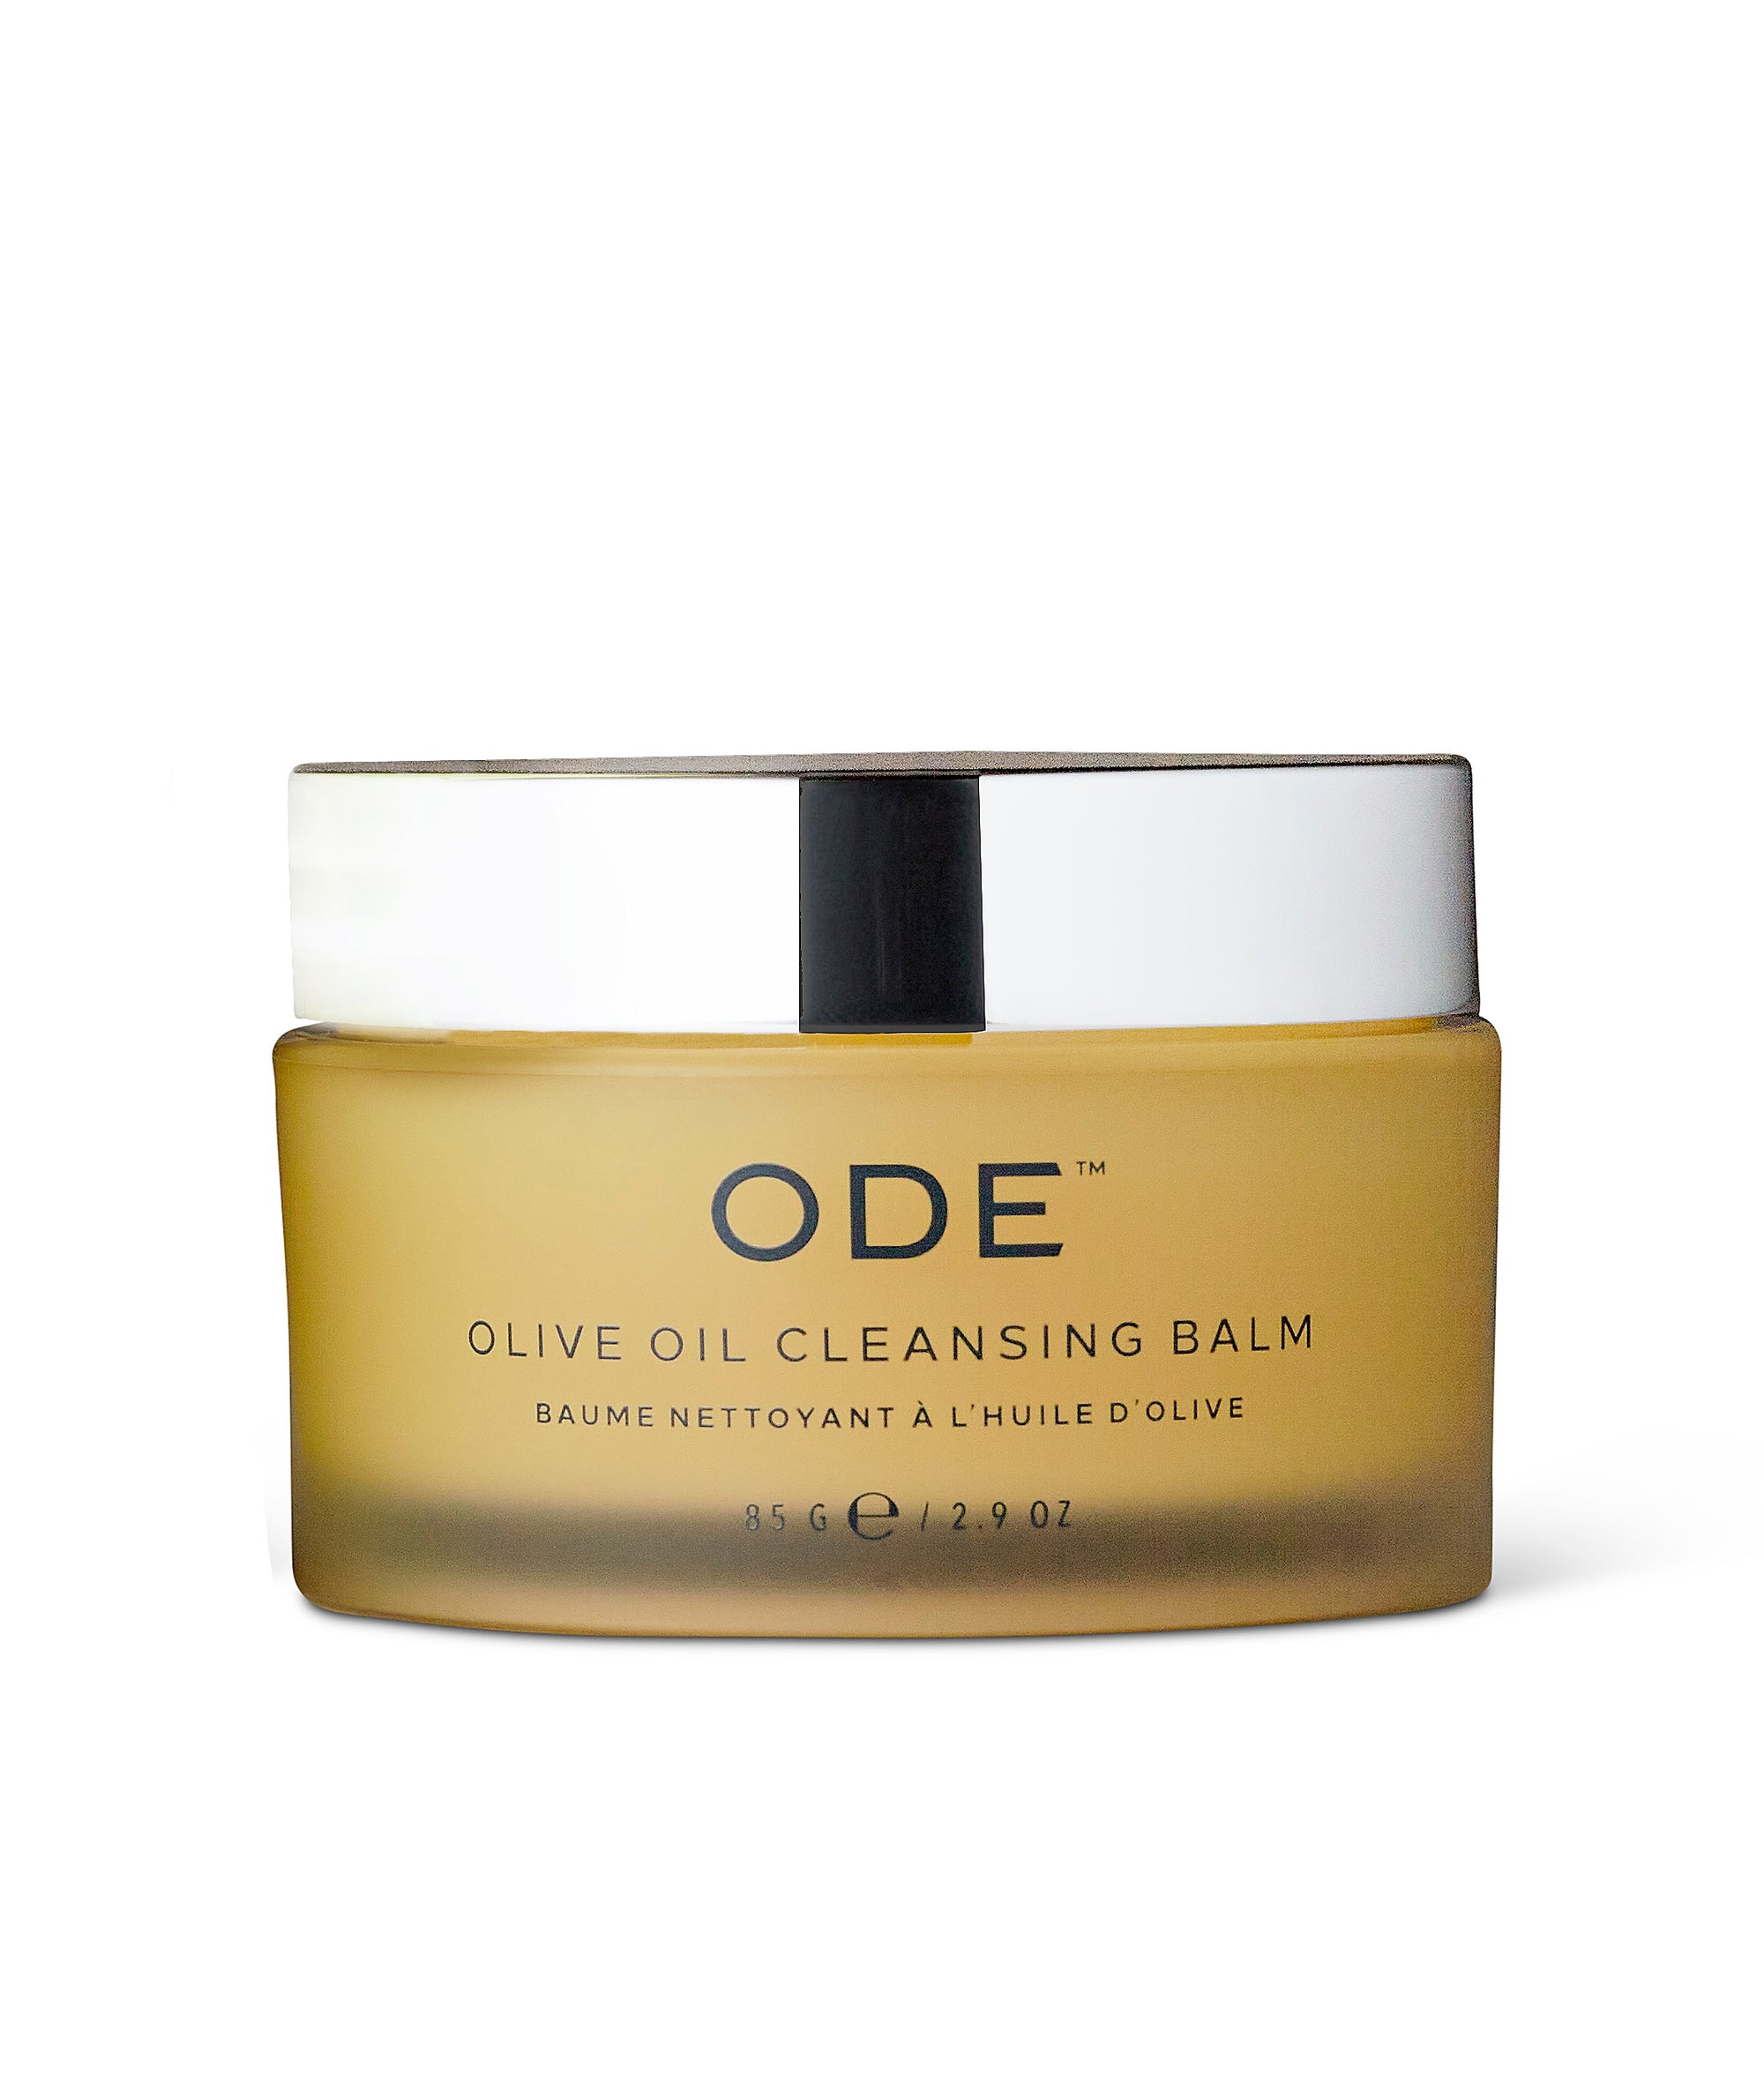 ODE Olive Oil Cleansing Balm & Makeup Remover